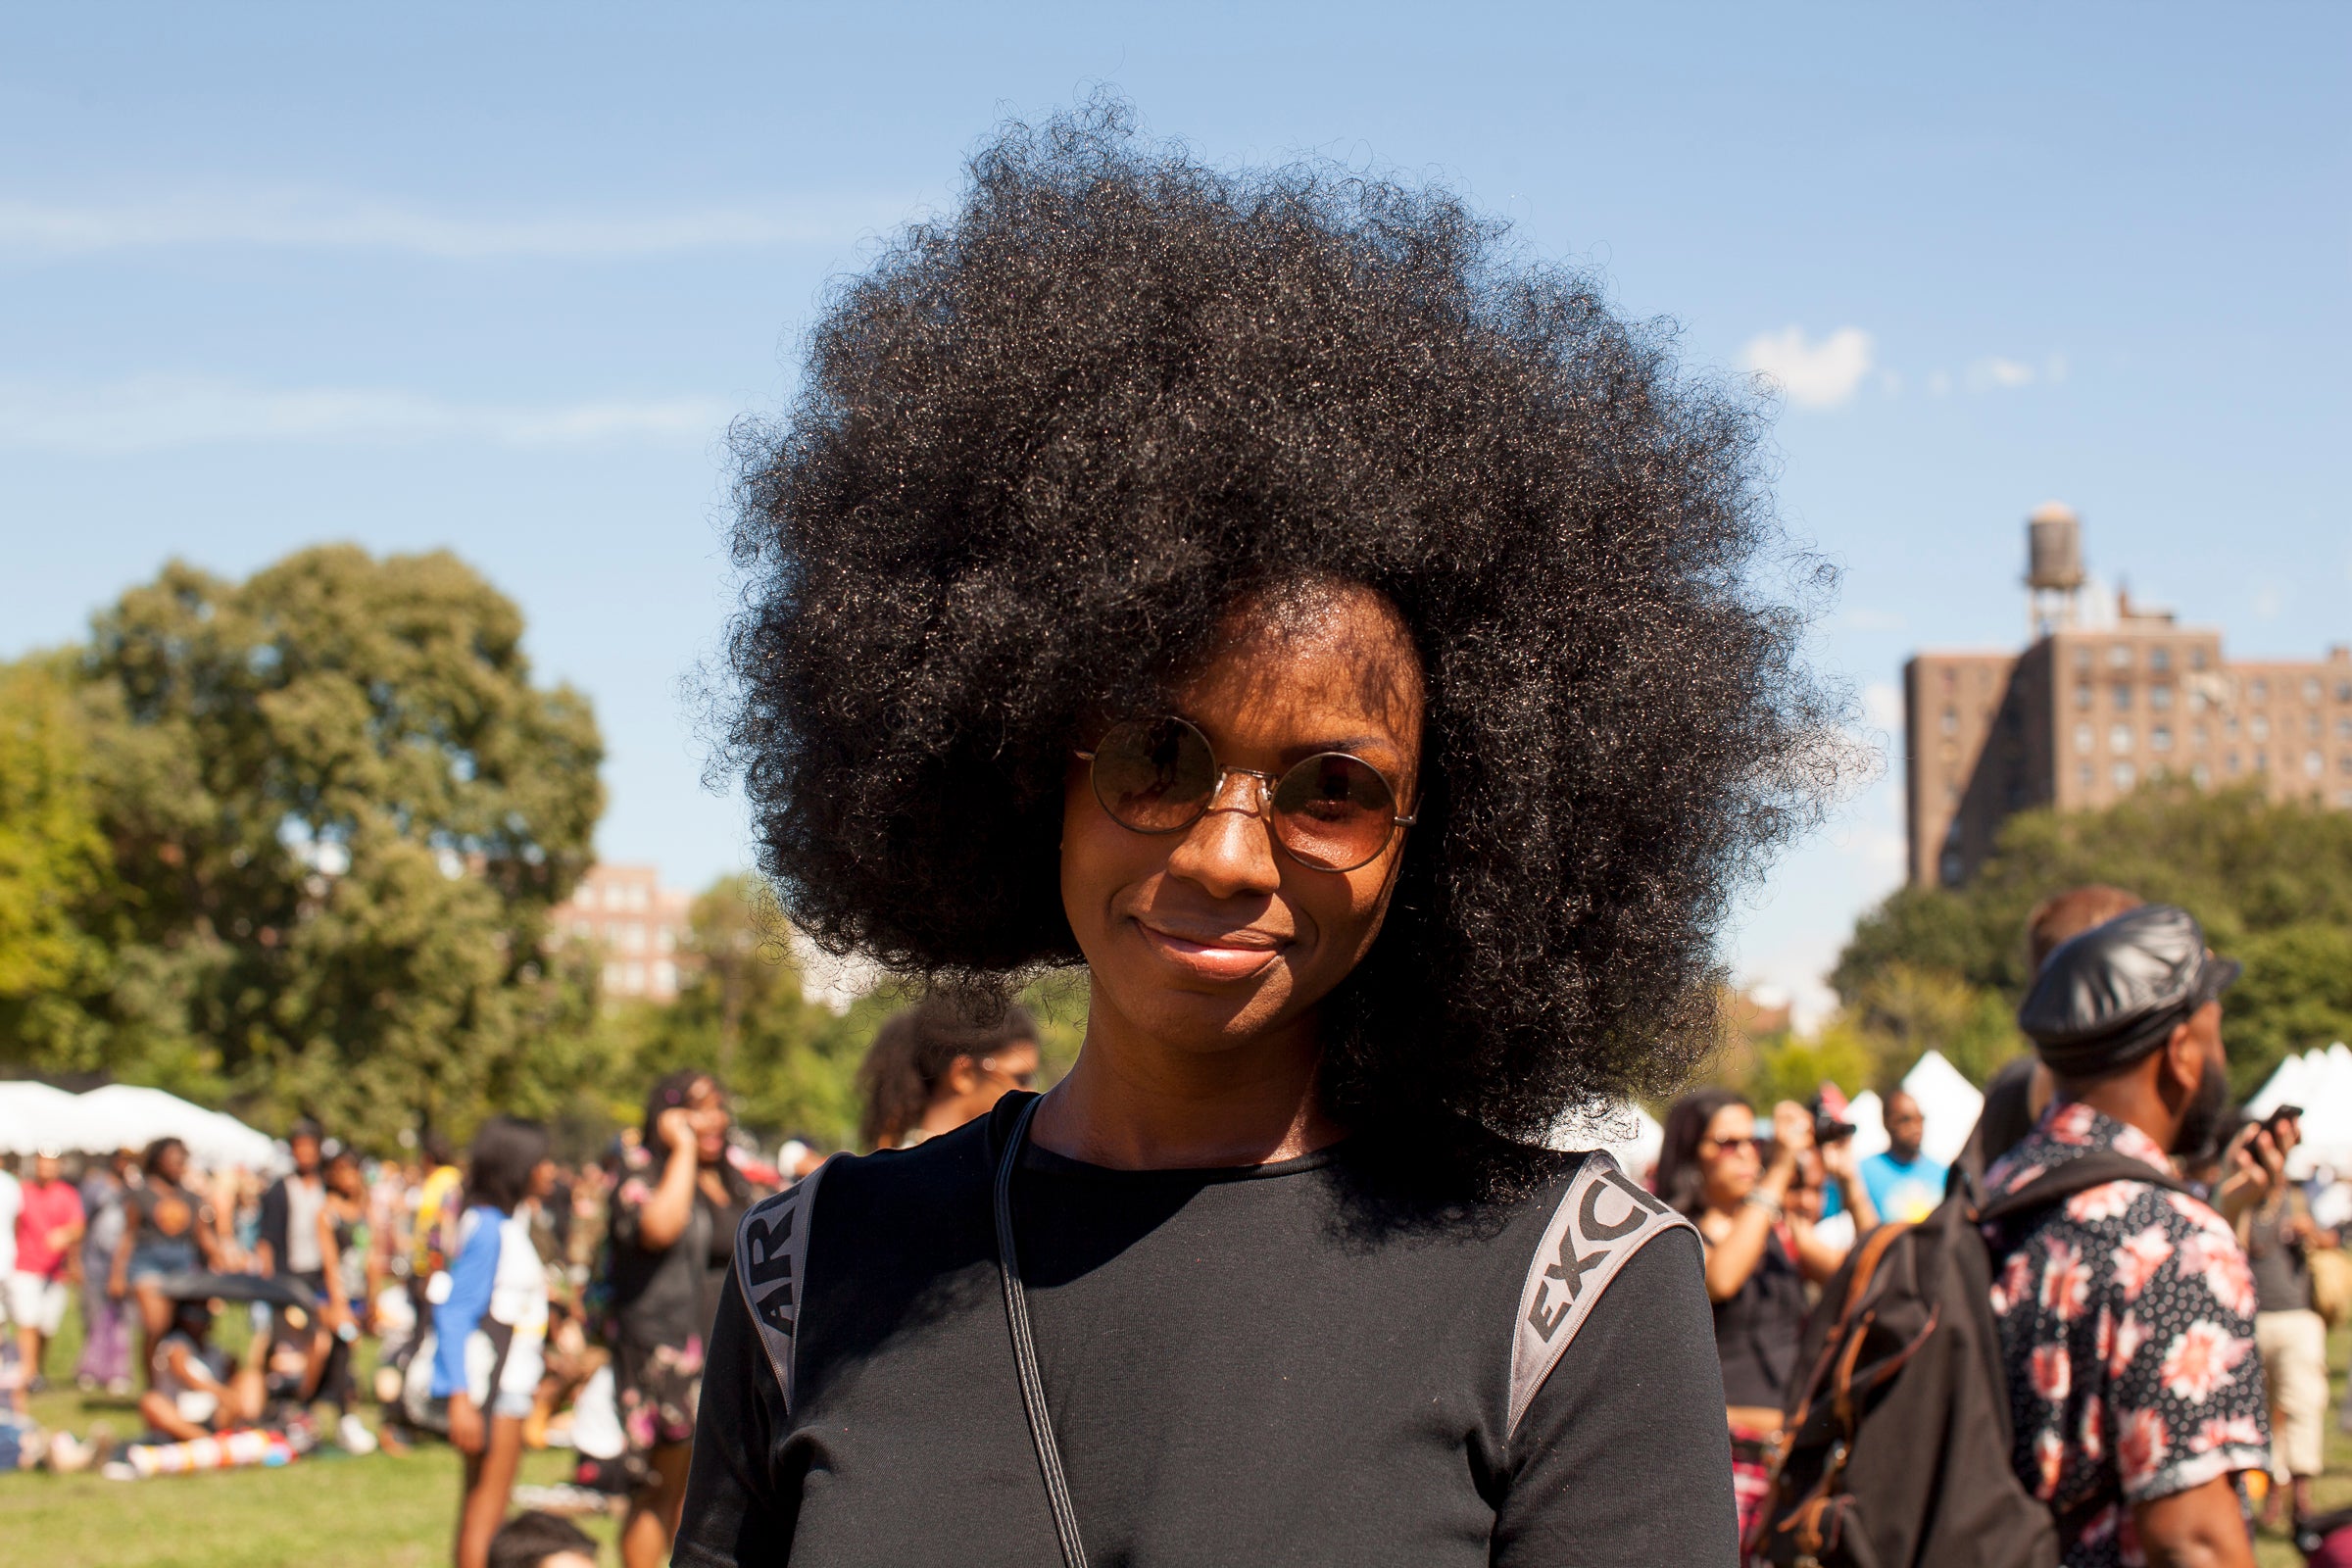 Street Style Hair: Eclectic Coifs